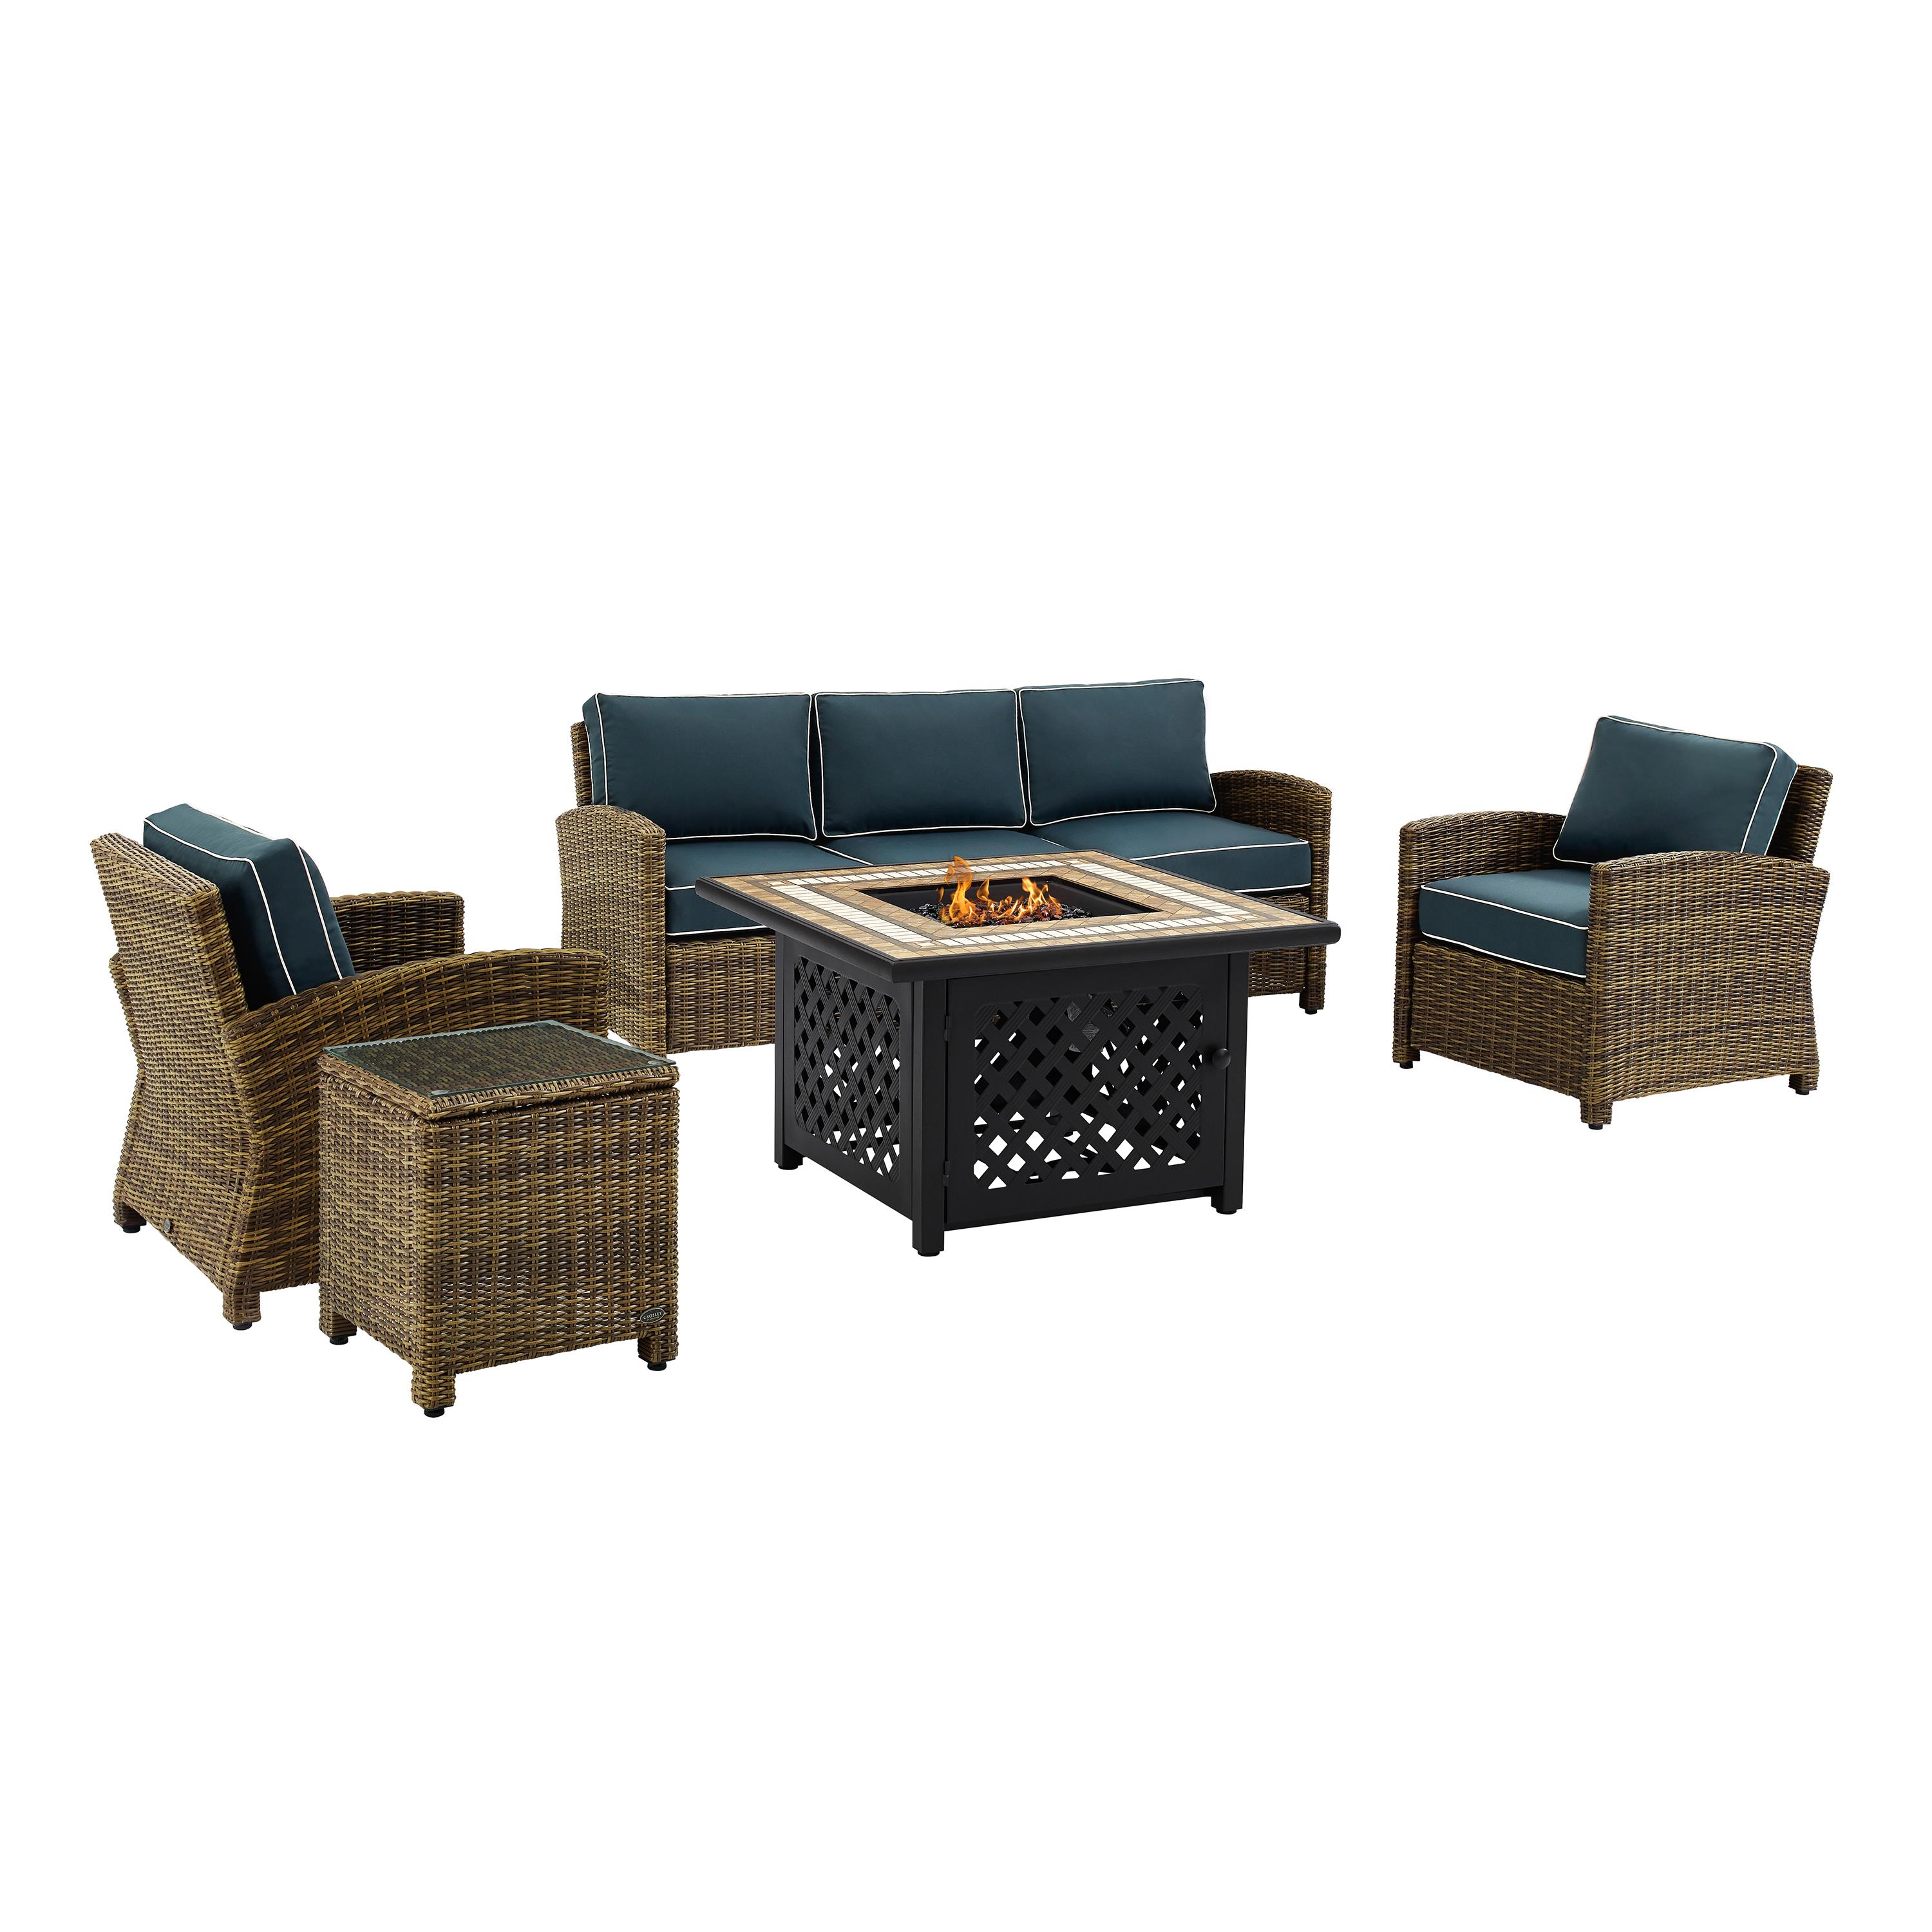 Crosley Furniture Bradenton 5Pc Patio Fabric Fire Pit Sofa Set in Brown and Navy - image 4 of 9